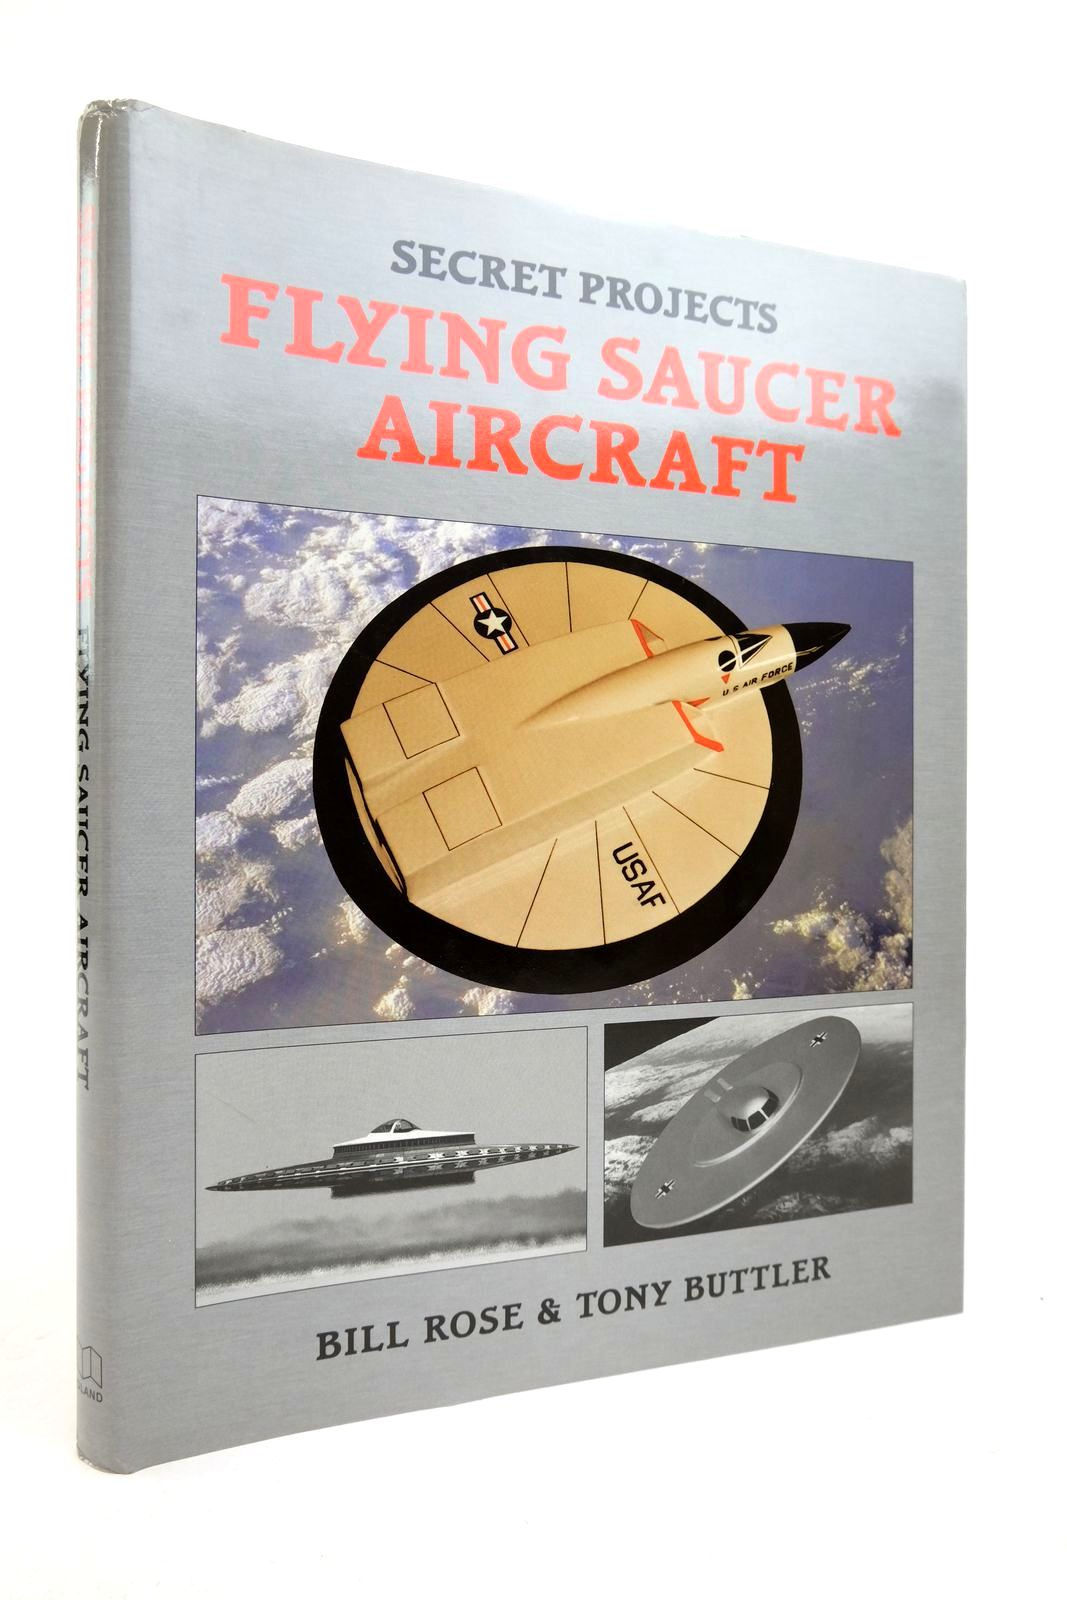 Photo of SECRET PROJECTS: FLYING SAUCER AIRCRAFT written by Rose, Bill Buttler, Tony published by Midland Publishing (STOCK CODE: 2139648)  for sale by Stella & Rose's Books